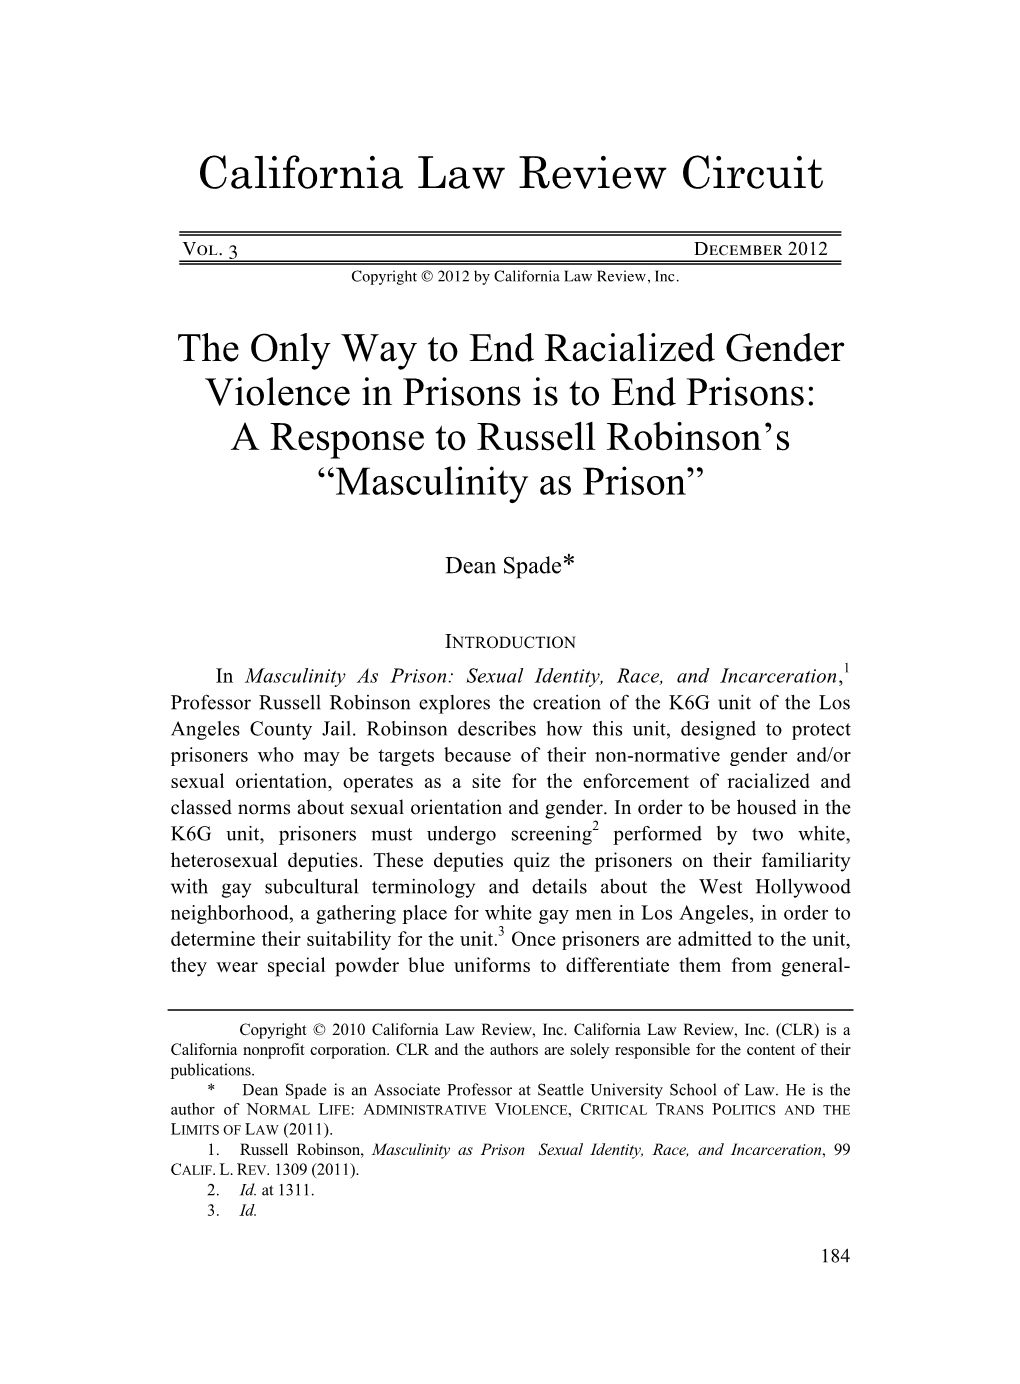 The Only Way to End Racialized Gender Violence in Prisons Is to End Prisons: a Response to Russell Robinson’S “Masculinity As Prison”